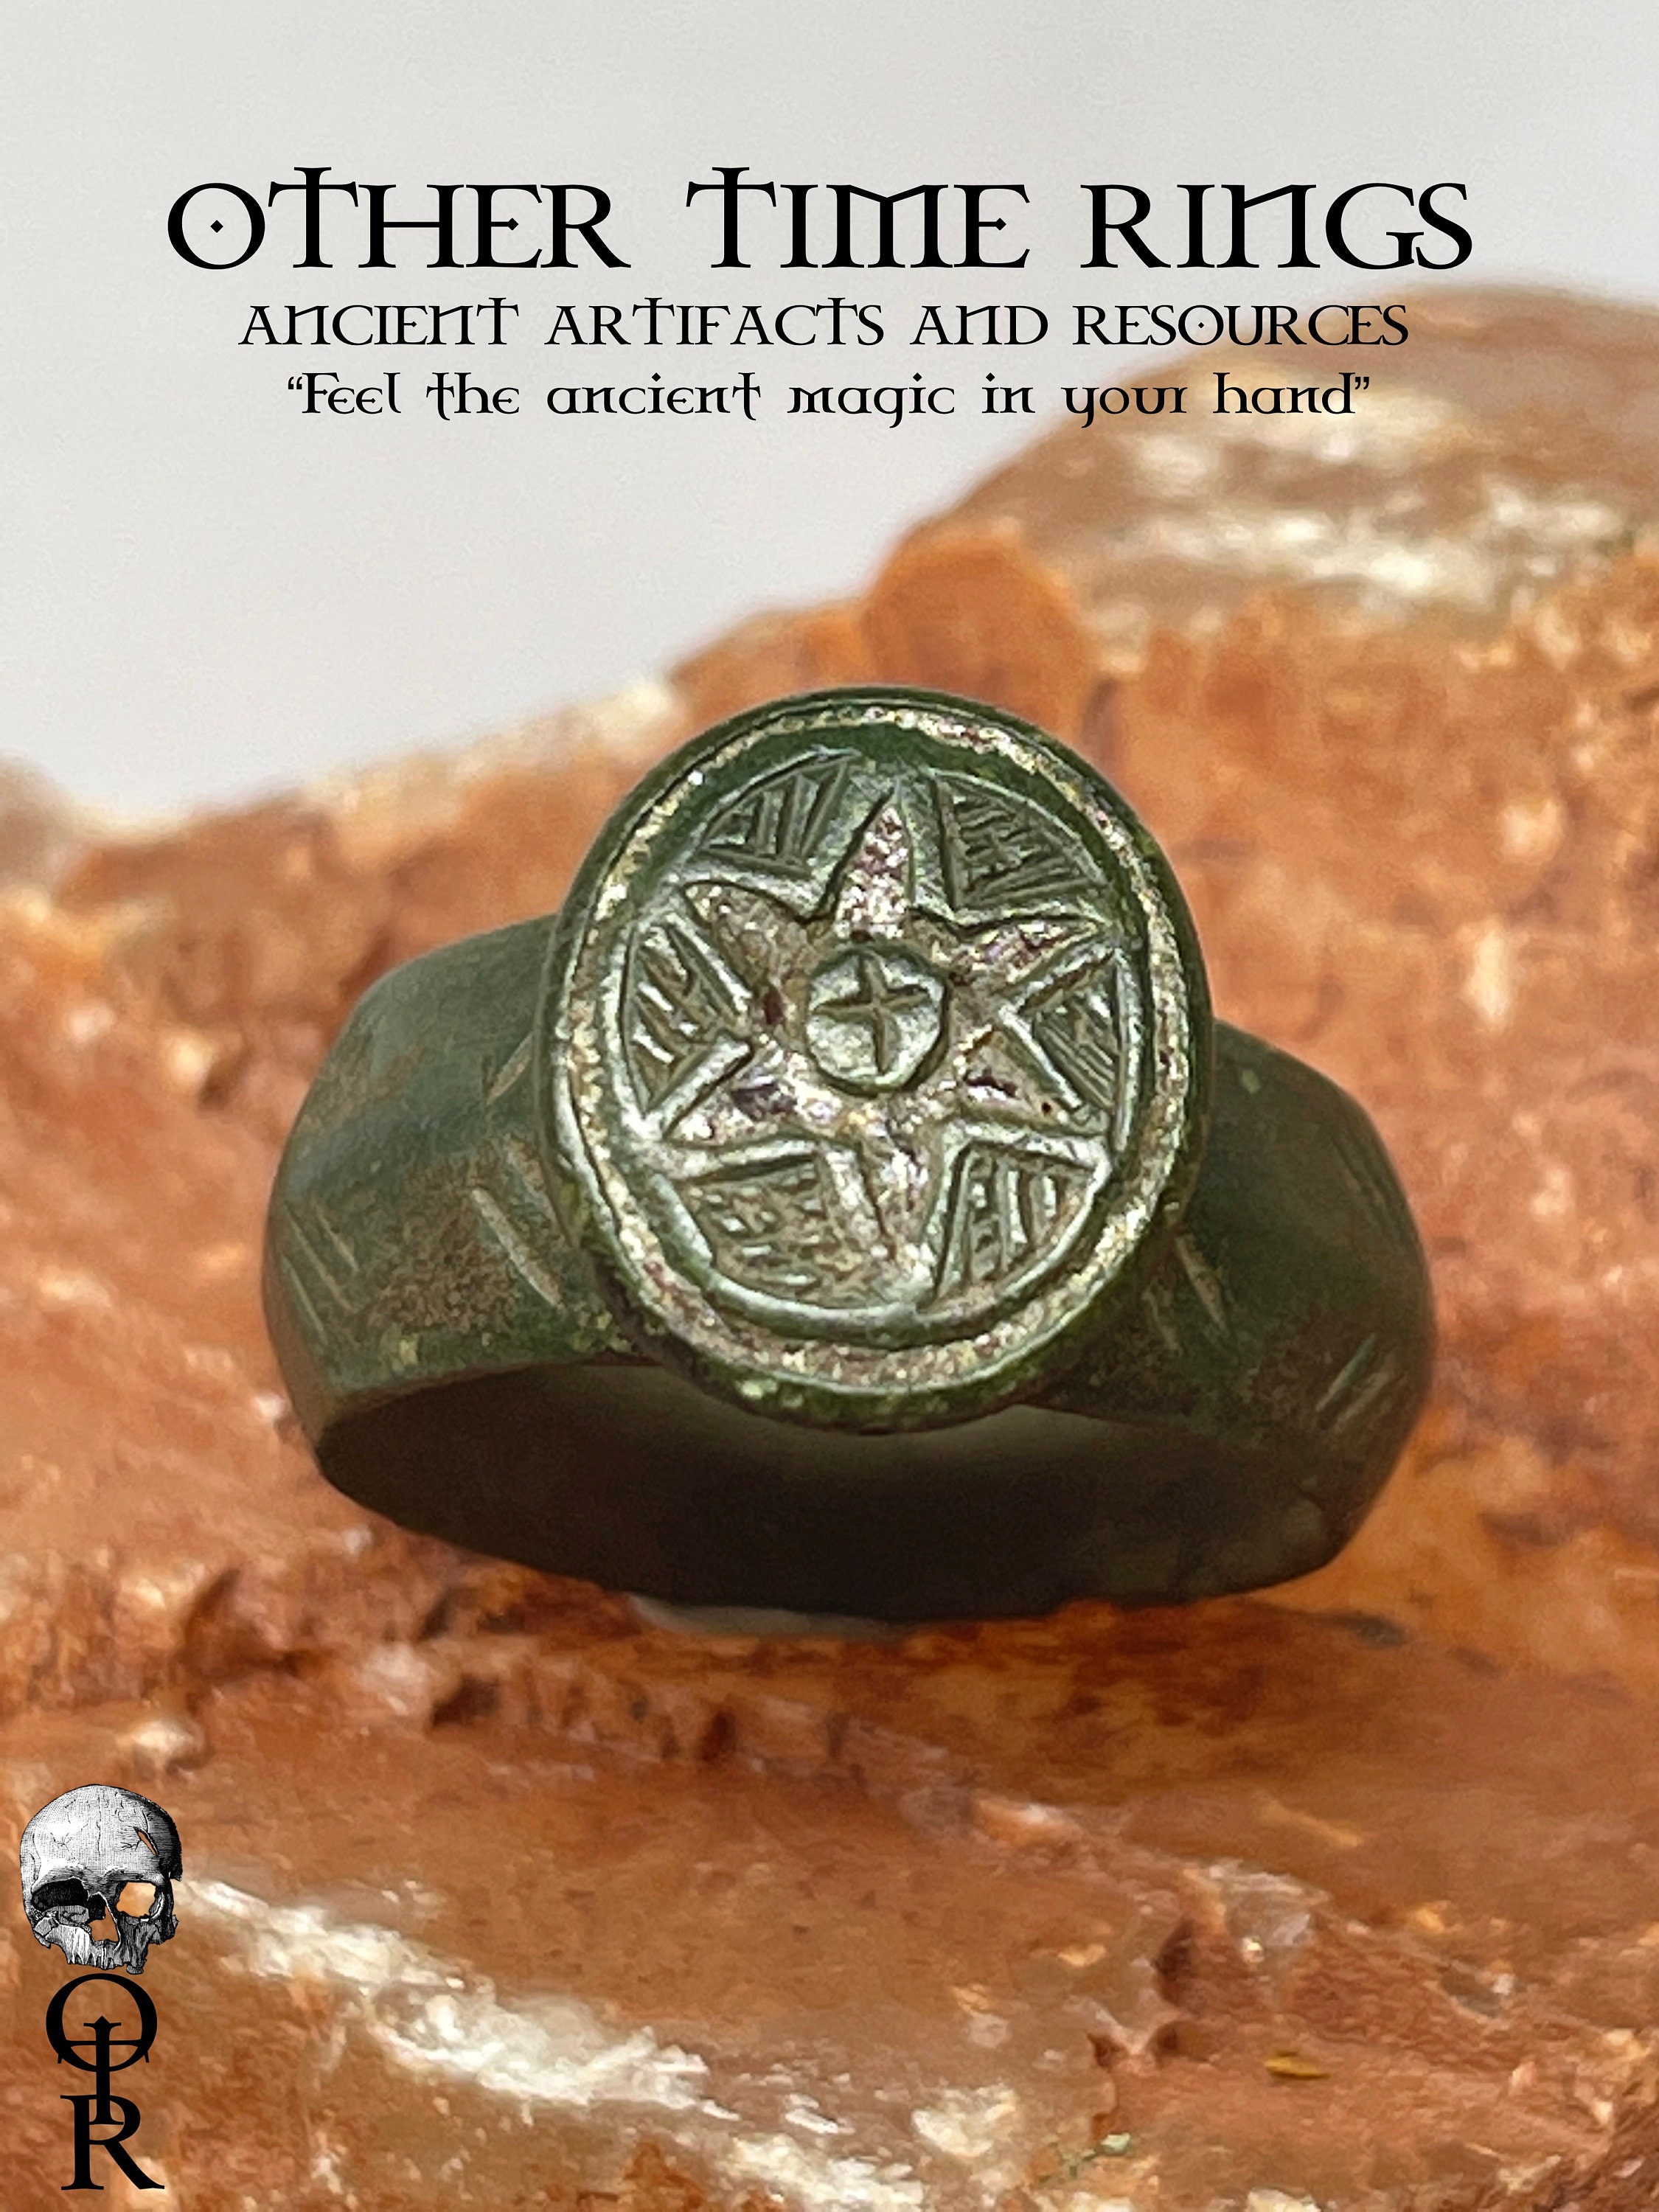 Rings from the Forbidden Forest: the function and meaning of Roman trinket  rings, Journal of Roman Archaeology